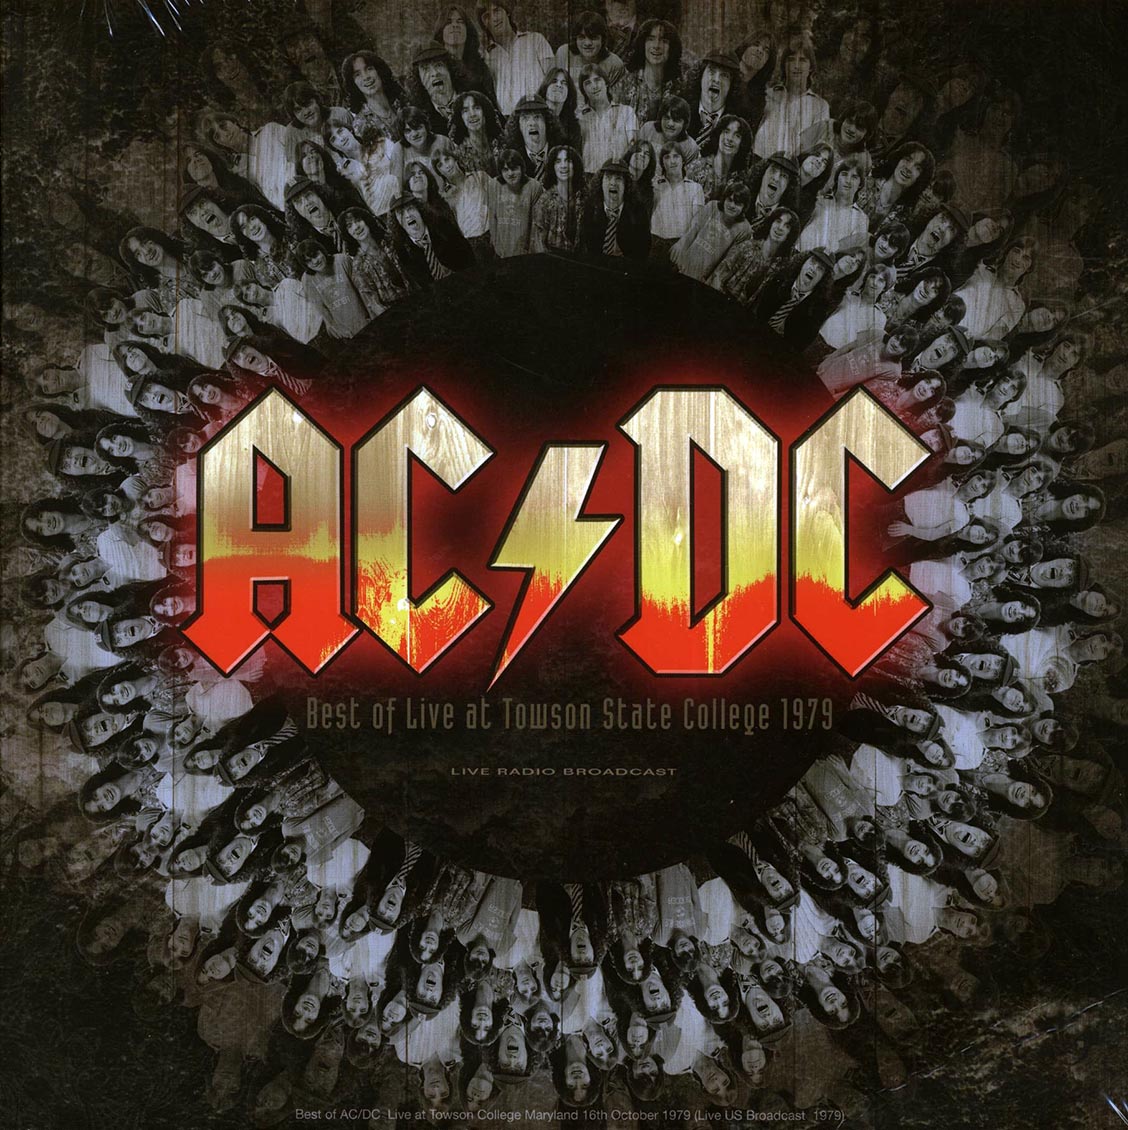 AC/DC - Best Of Live At Towson State College 1979, Maryland, October 16th - Vinyl LP